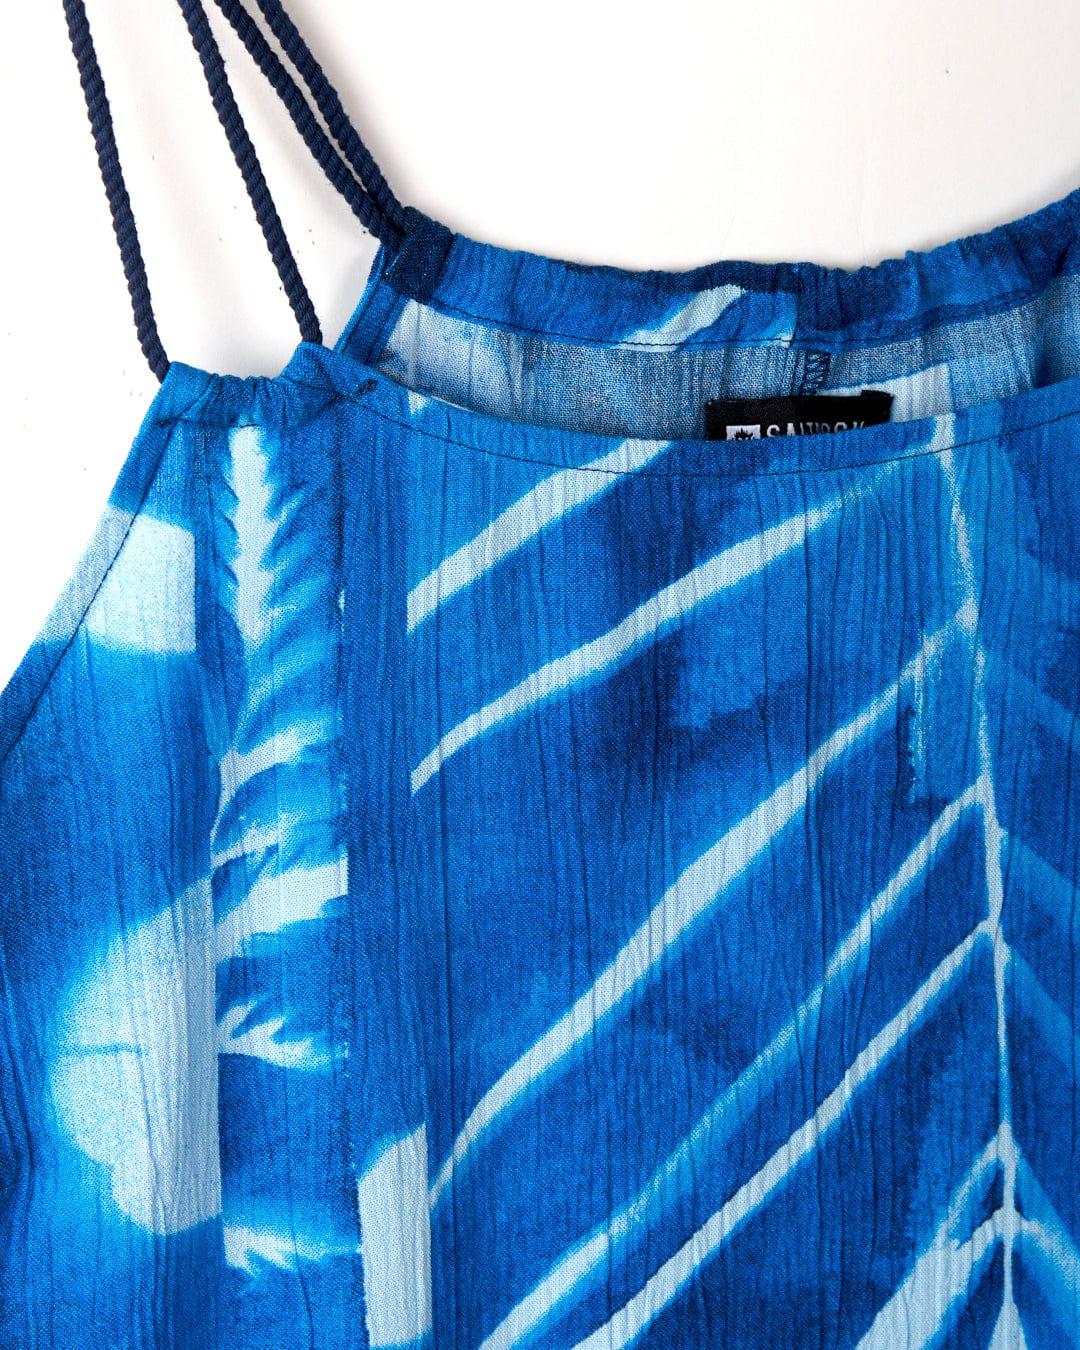 Close-up of a Cyanotype - Womens Cami - Blue by Saltrock with white abstract floral print and thin shoulder straps made from lightweight material. A black clothing label is partially visible inside the neckline.